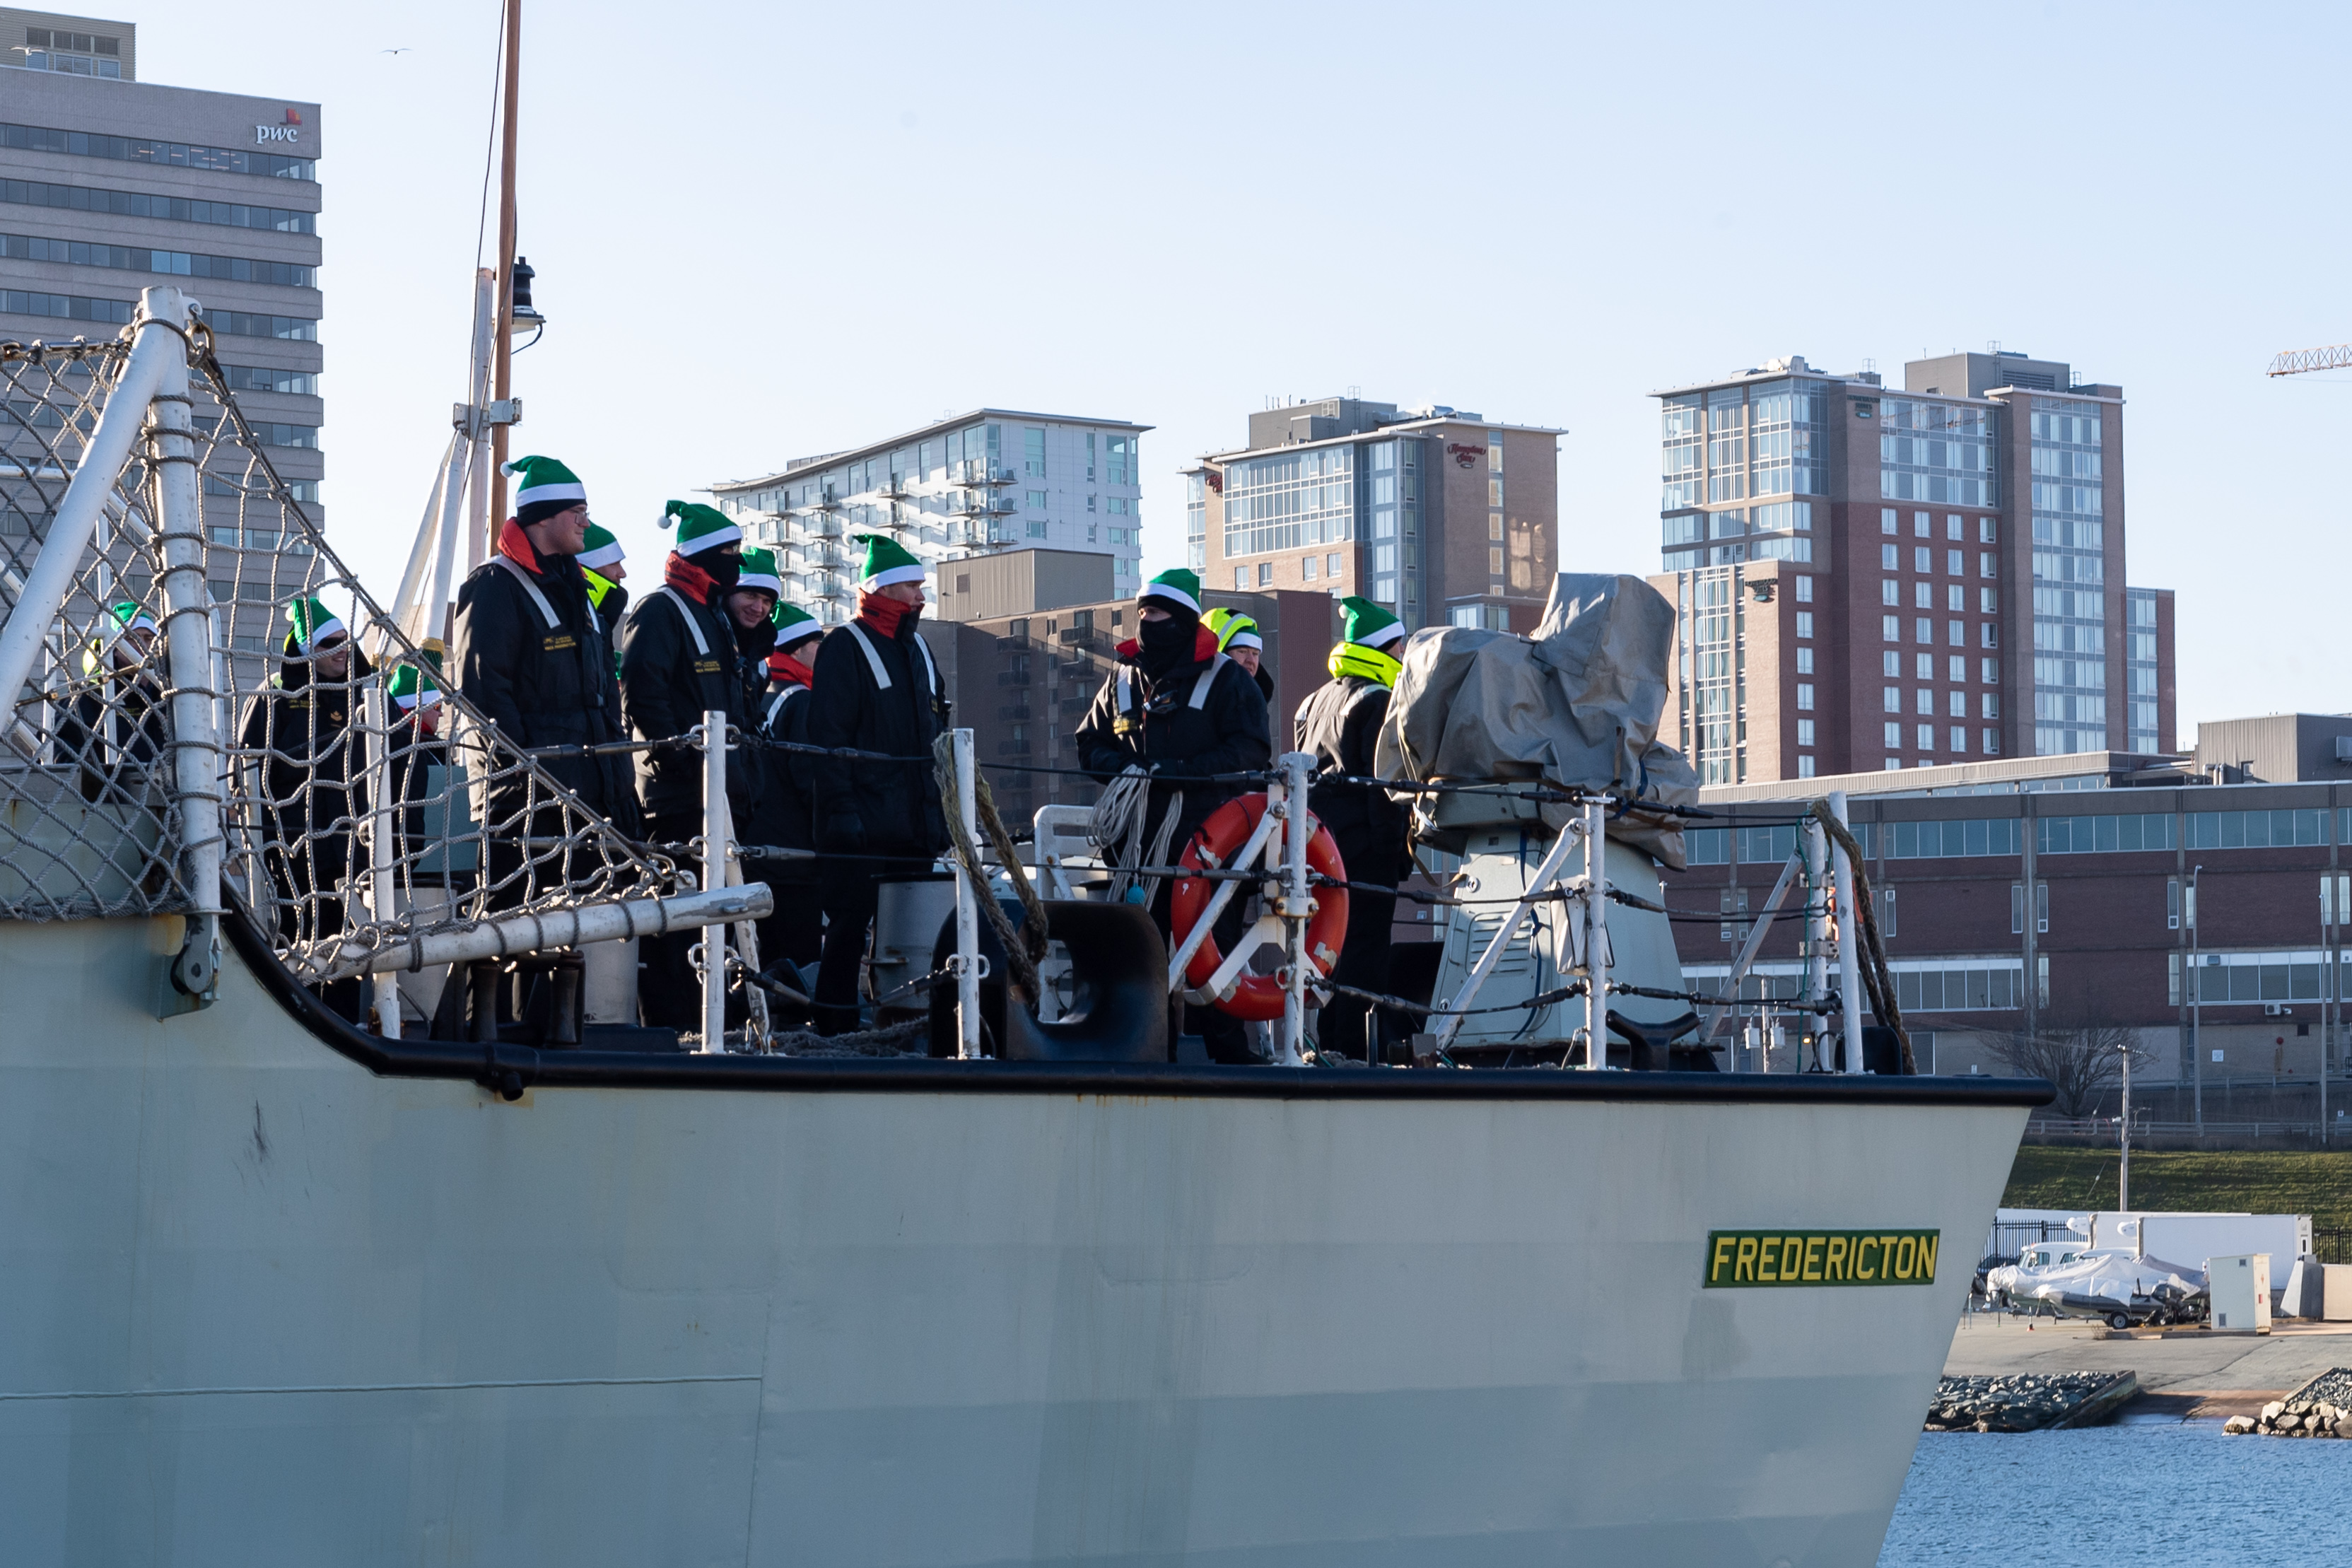 HMCS Fredericton arrived home in Halifax on December 18, 2021, in time for the holidays.